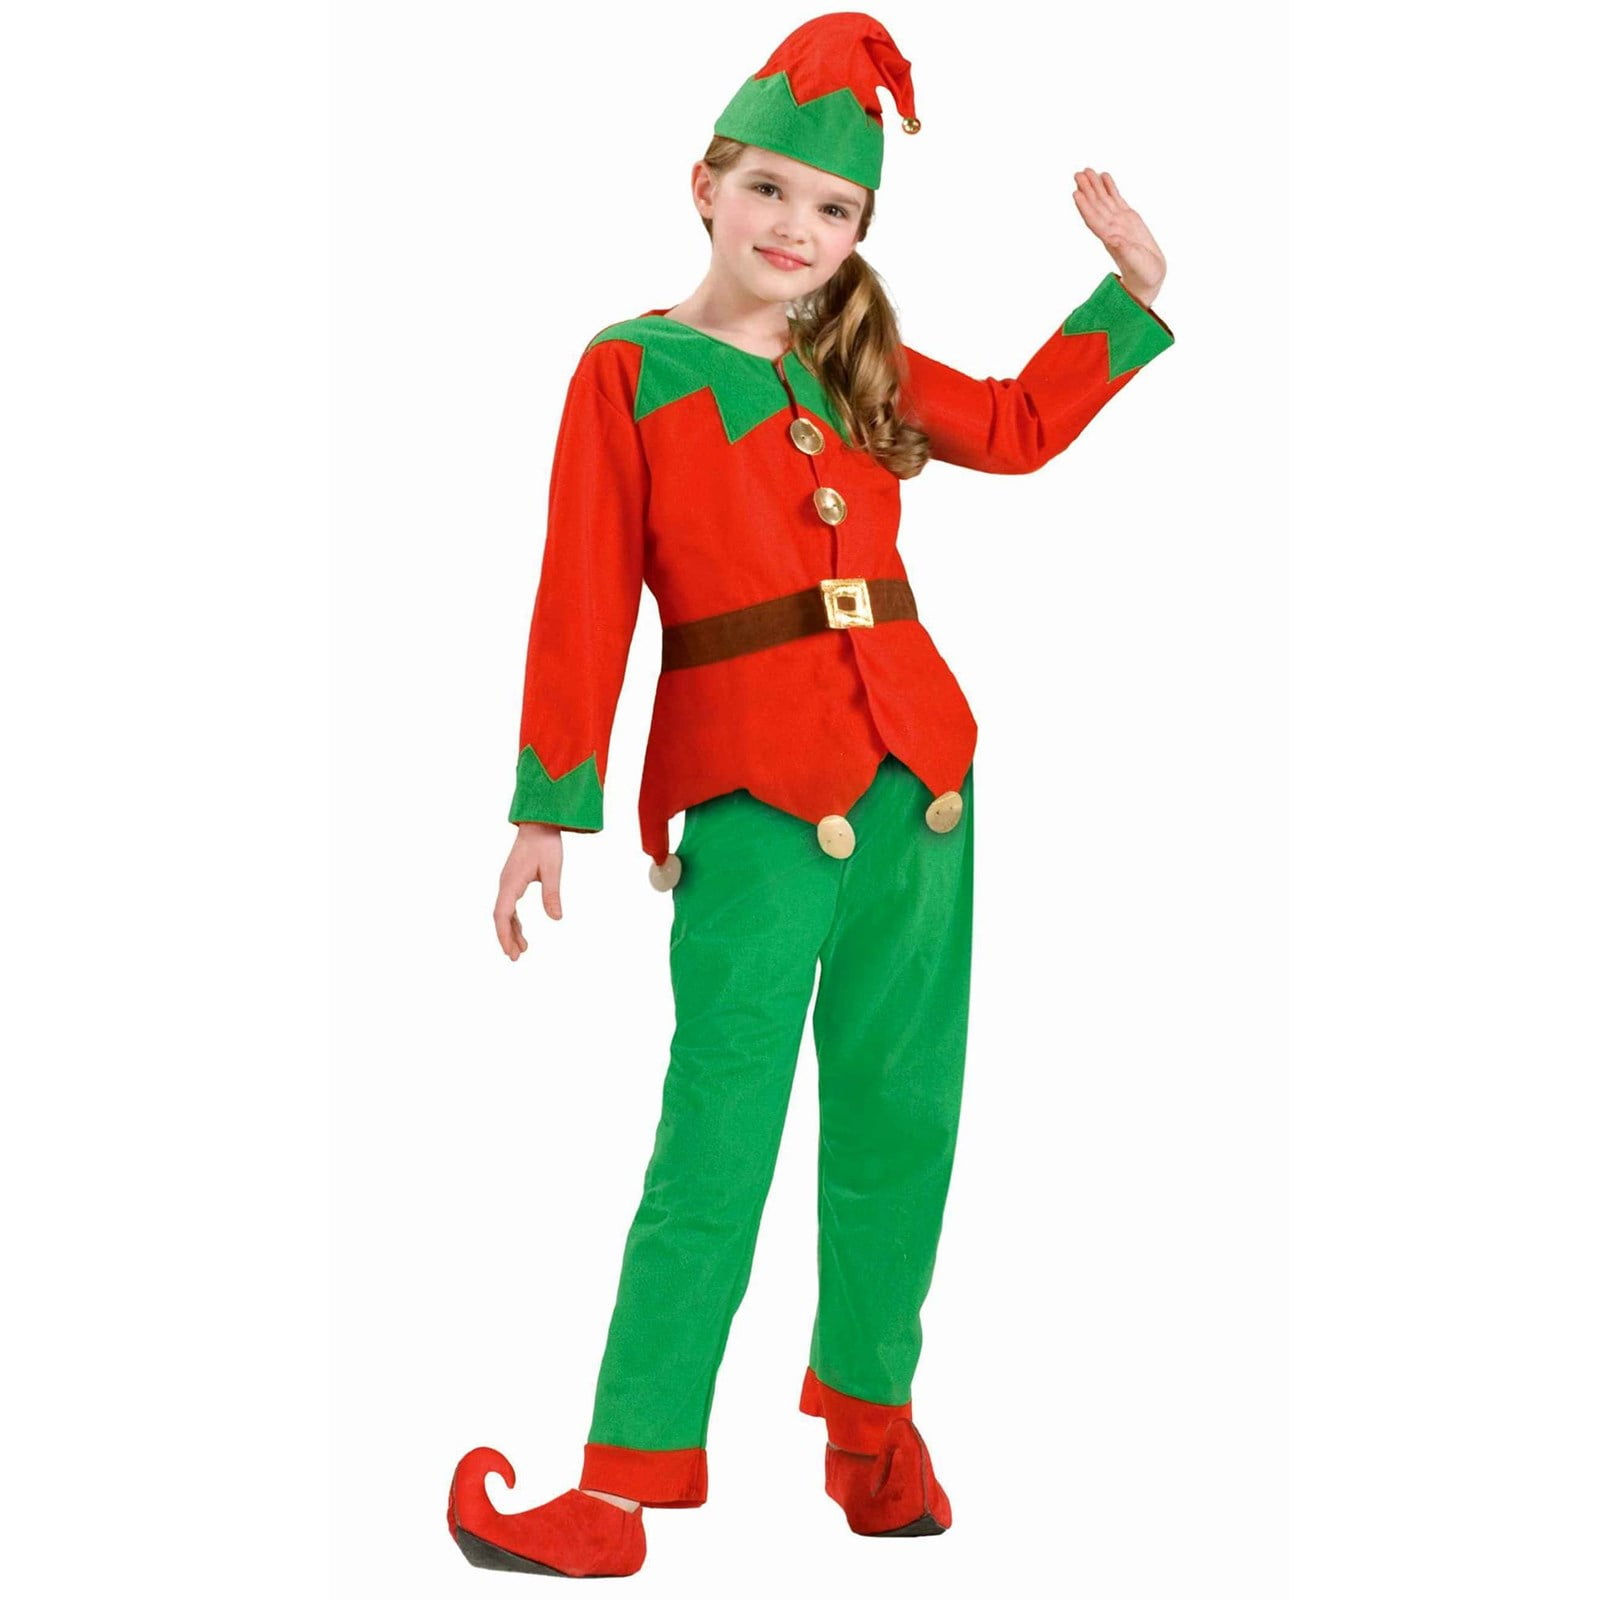 Kids Unisex Elf Costume in Red and Green, Onesize 